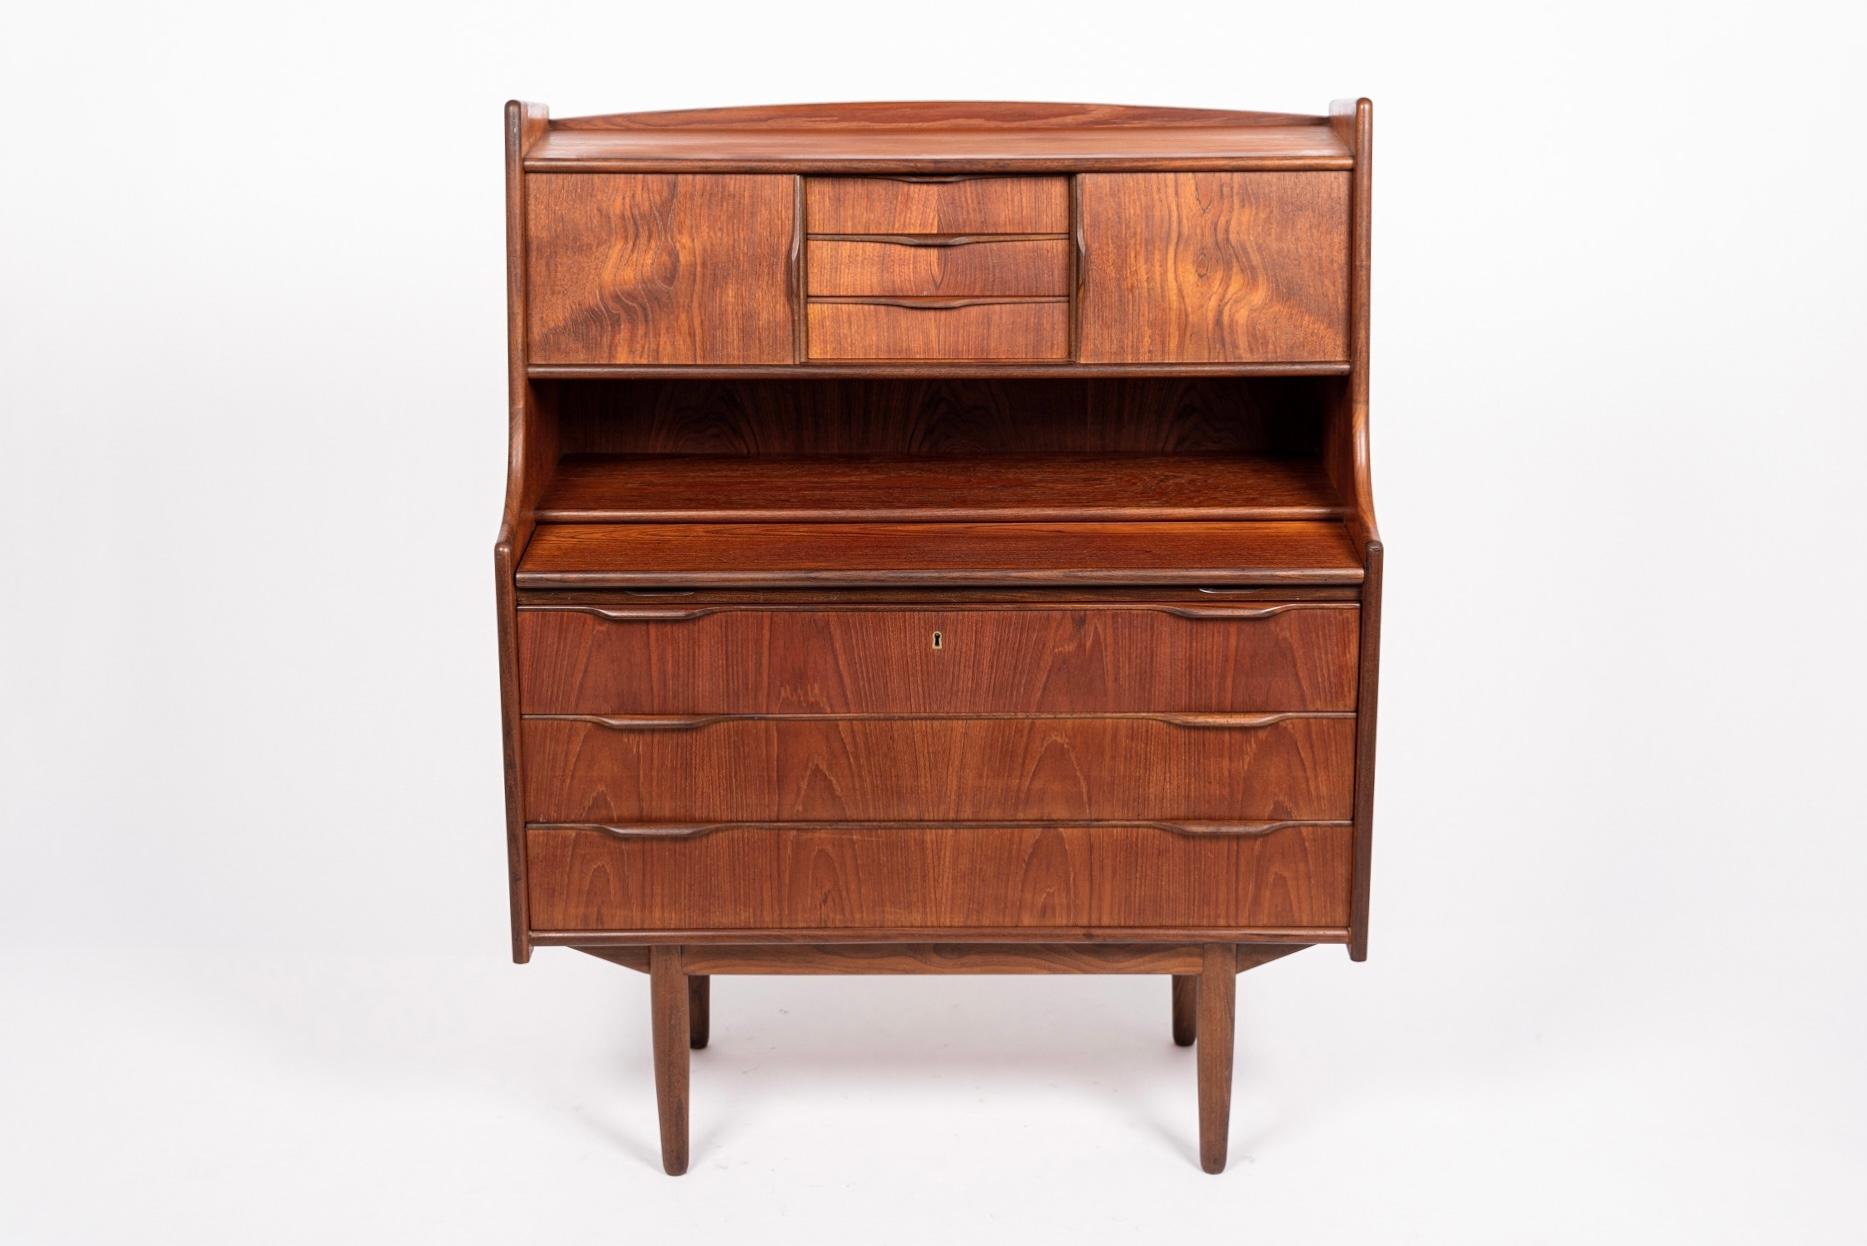 This vintage midcentury Finnish modern teak secretary desk cabinet was made in Finland by Venesta circa 1960. The Classic Nordic modern design has clean, Minimalist lines and gentle curves and the teak exhibits beautiful natural grain. The upper